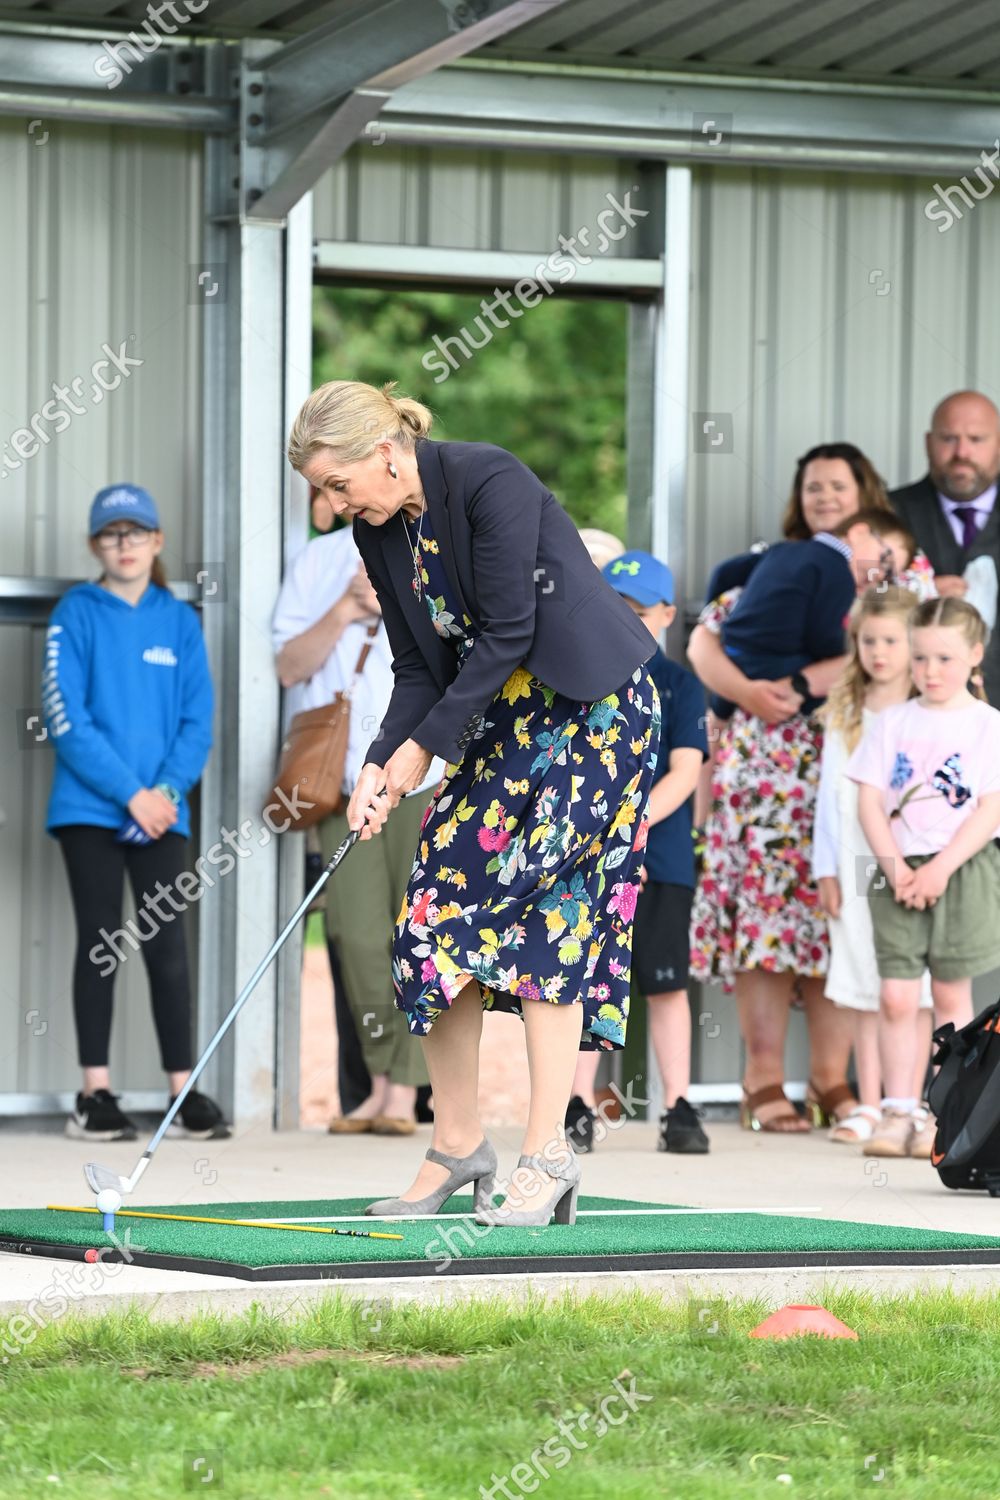 prince-edward-and-sophie-countess-of-wessex-visit-to-forfar-golf-club-scotland-uk-shutterstock-editorial-12172307x.jpg